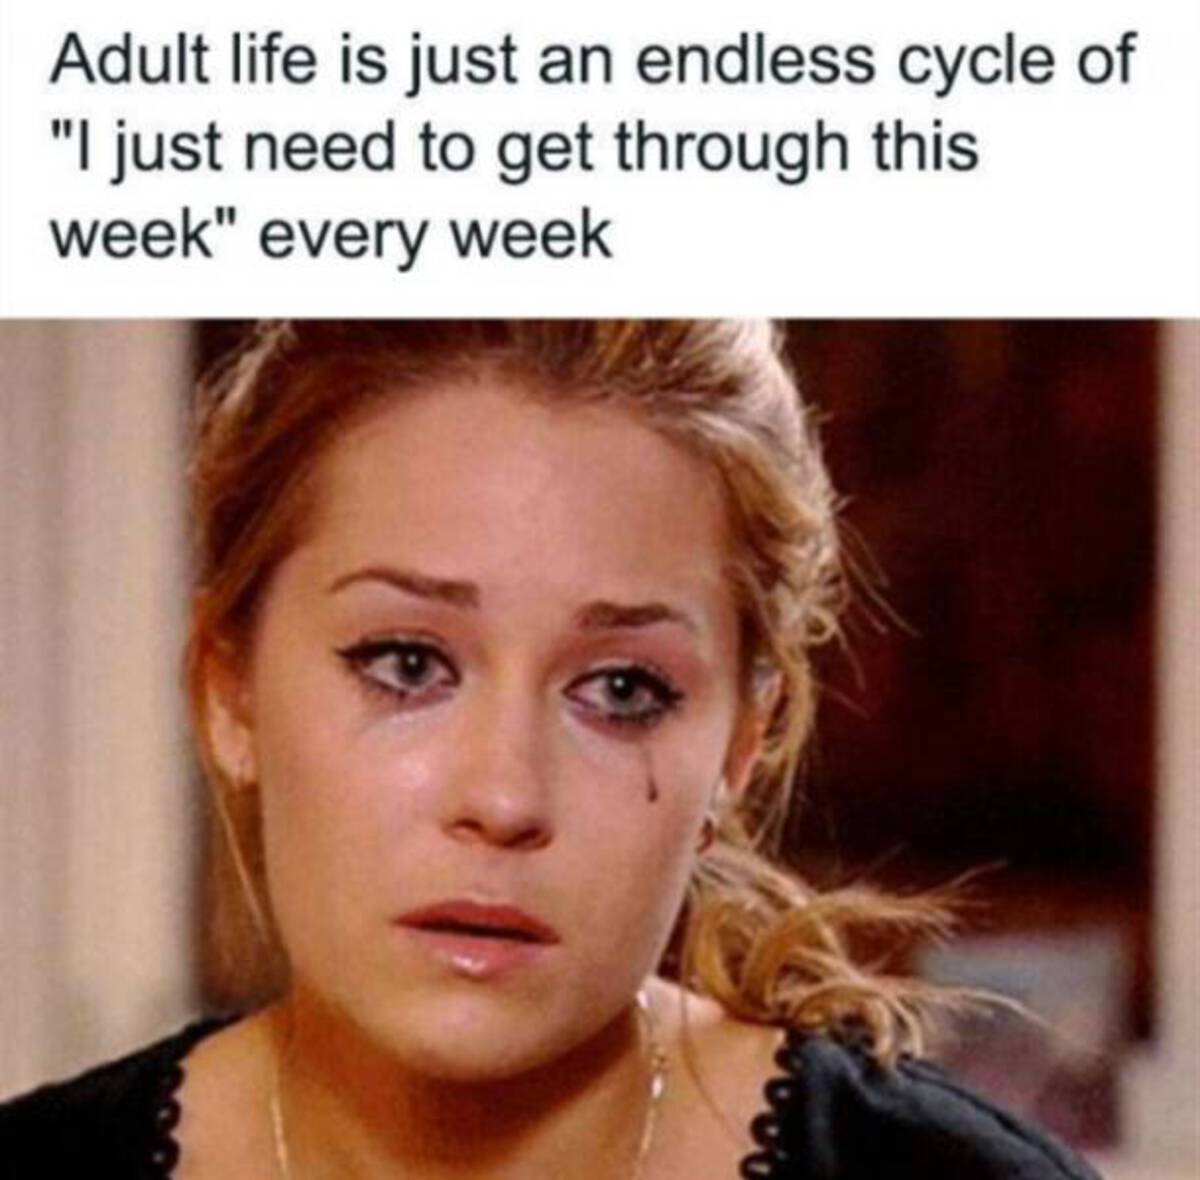 mascara tears - Adult life is just an endless cycle of "I just need to get through this week" every week